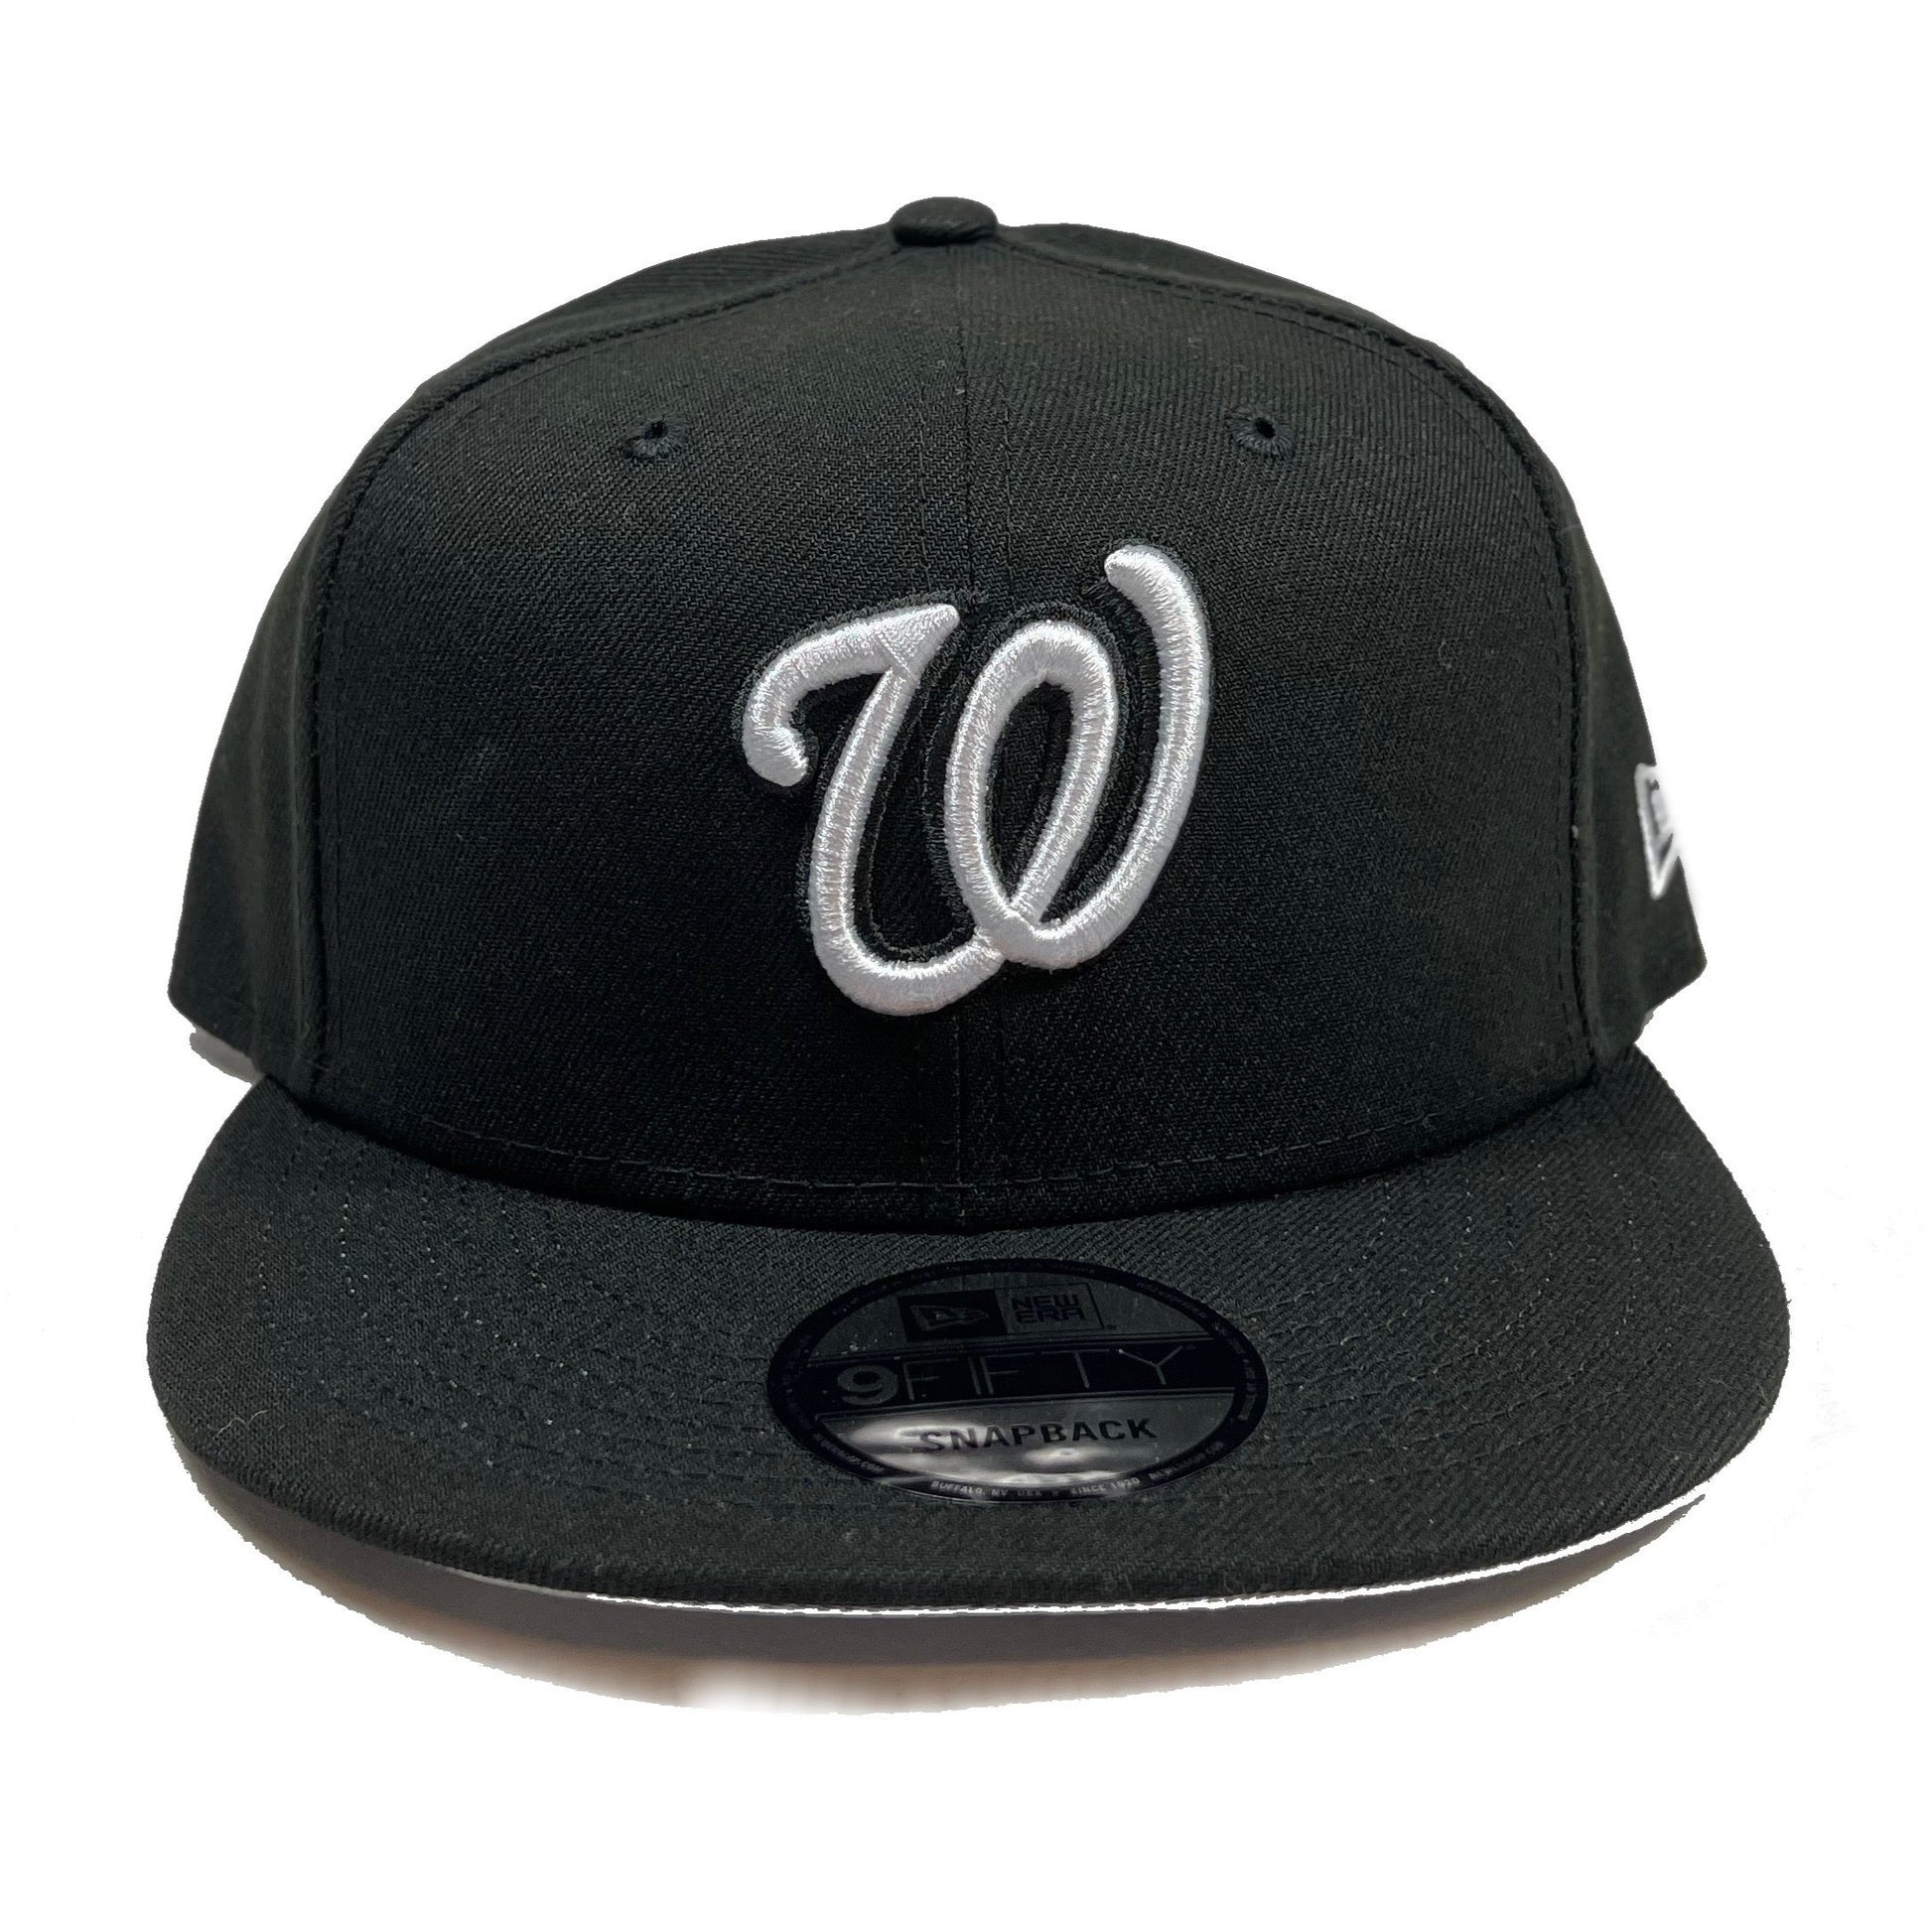 Washington Nationals (Black) Snapback/Fitted – Cap World: Embroidery